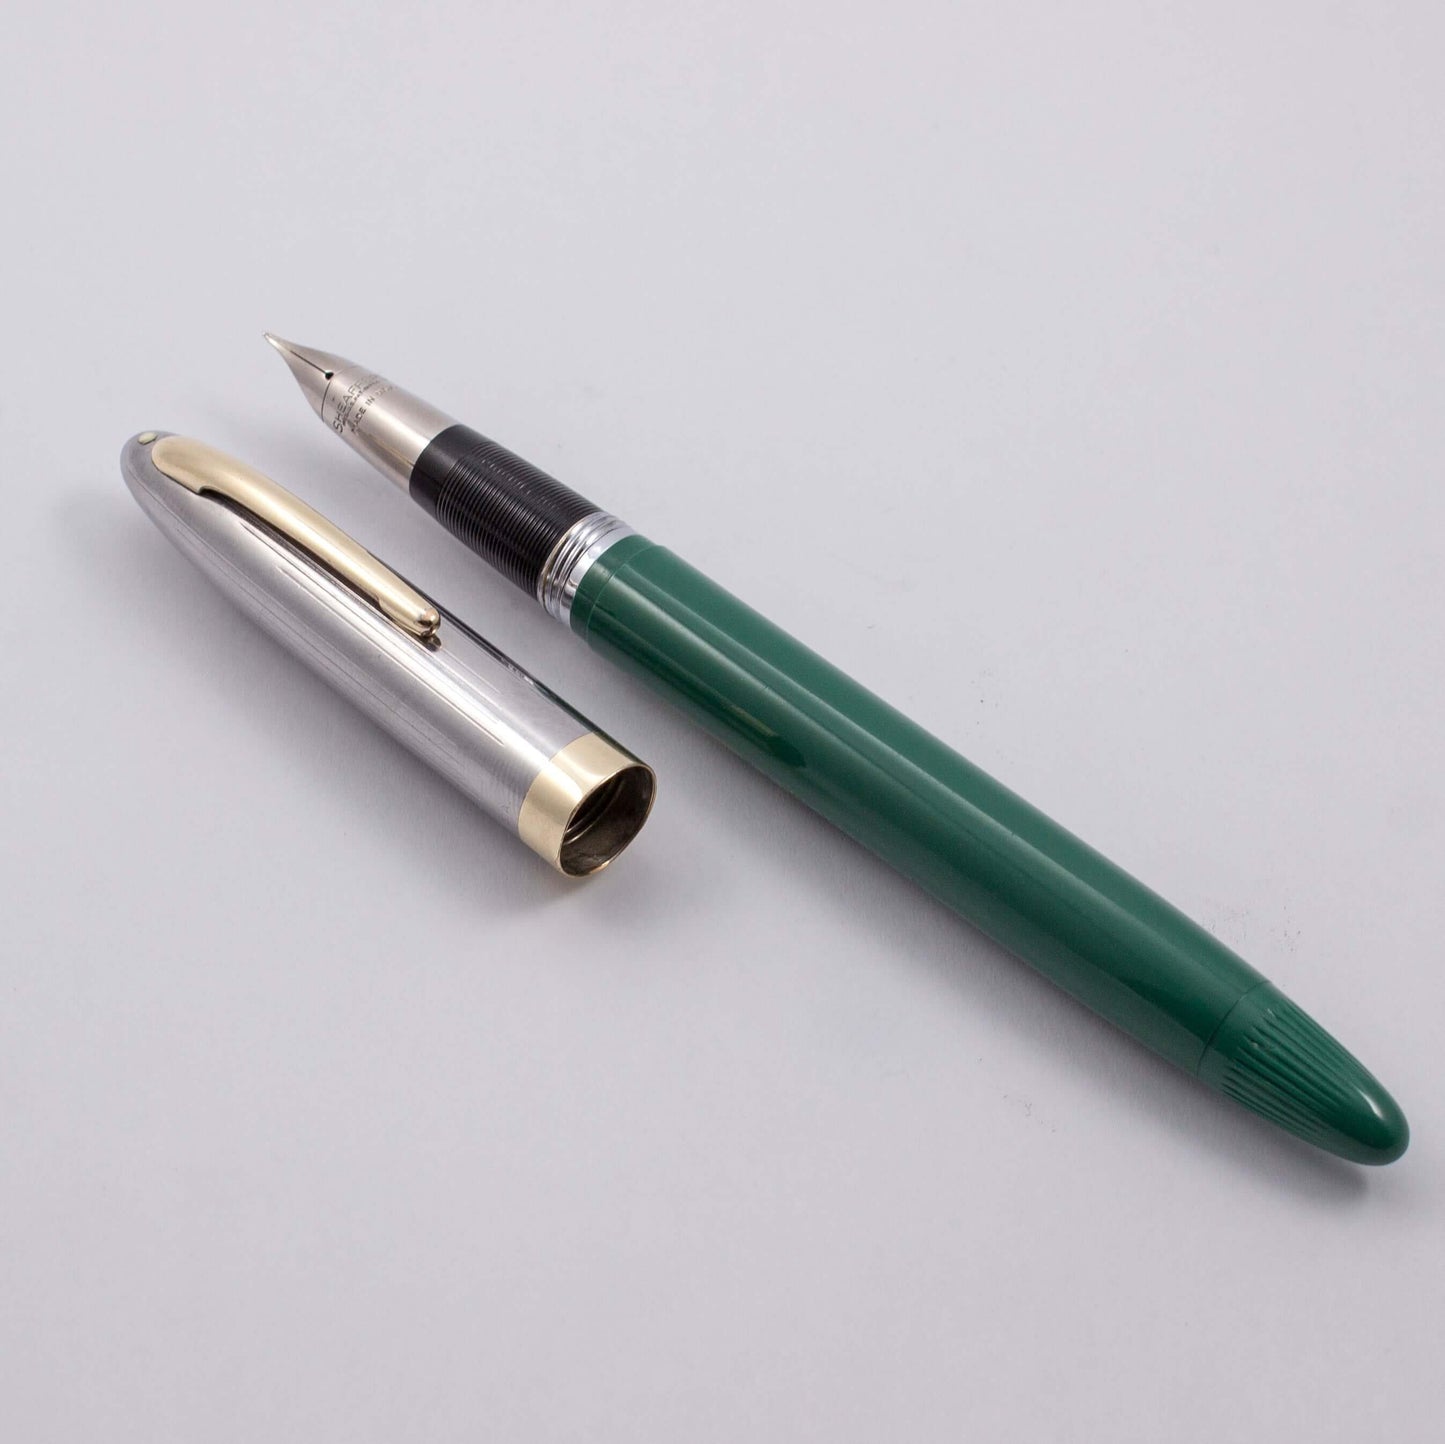 Sheaffer Snorkel Fountain Pen, Clipper, Fine PdAg Triumph Nib, White Dot Type: Restored Vintage Sheaffer Fountain Pen Product Name: Sheaffer Clipper Snorkel Manufacture Year: 1952-1959 Length: 5 9/16 Filling System: Snorkel Filler, Restored with new sac a